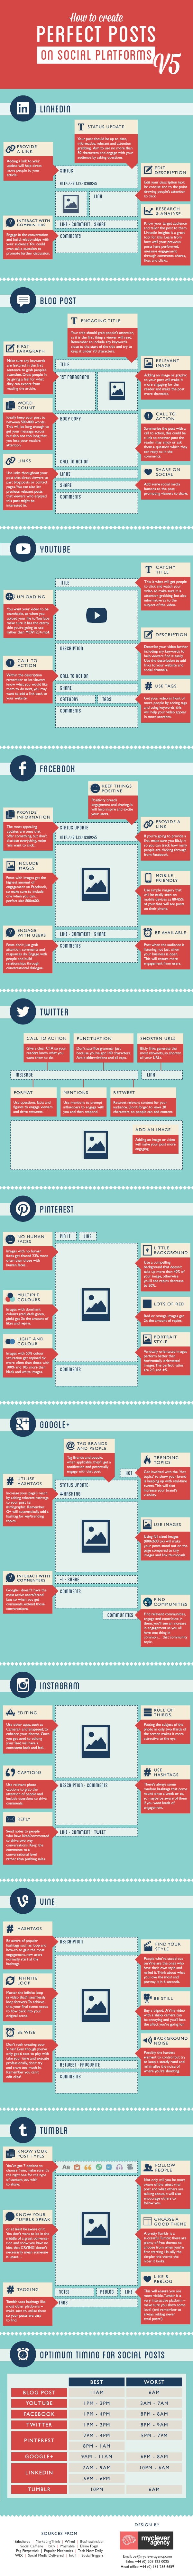 How to create a perfect post on social media platforms